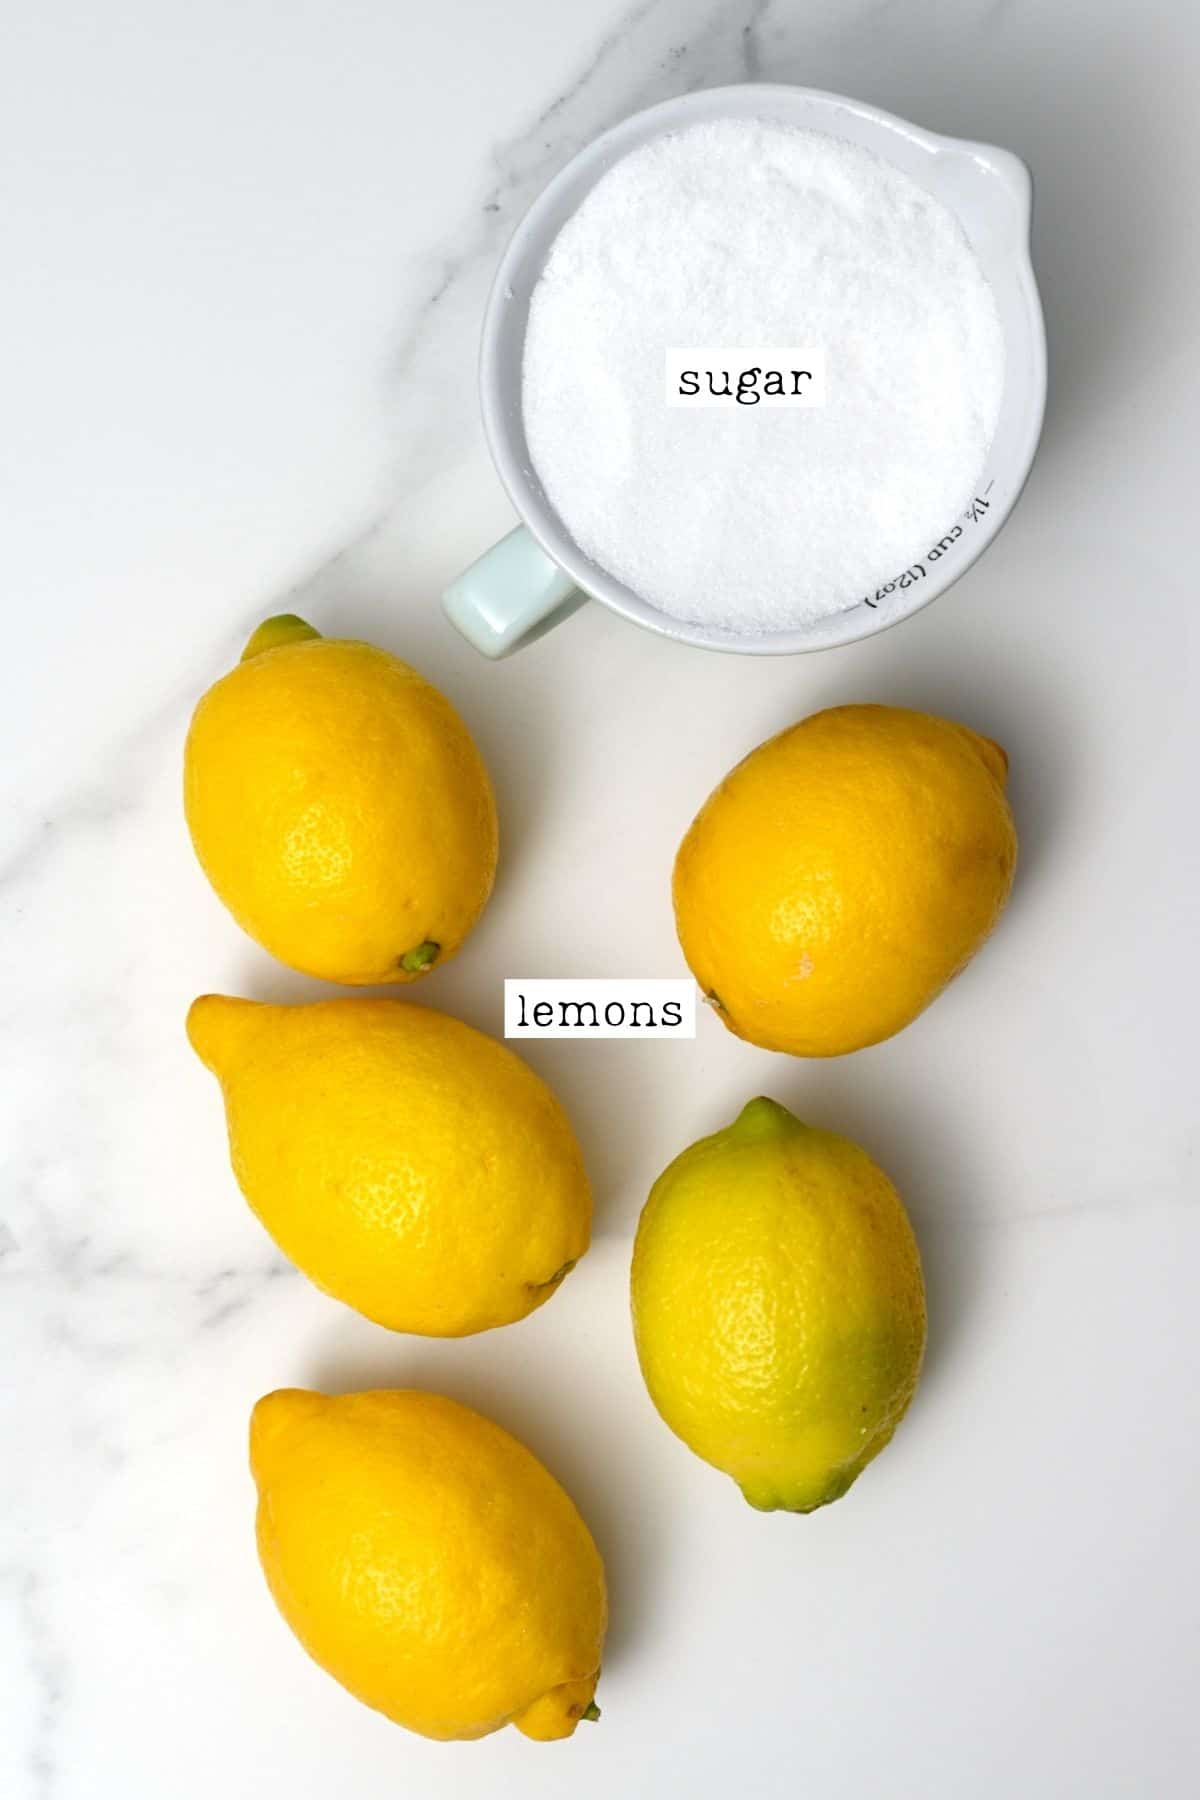 Ingredients for lemon simple syrup